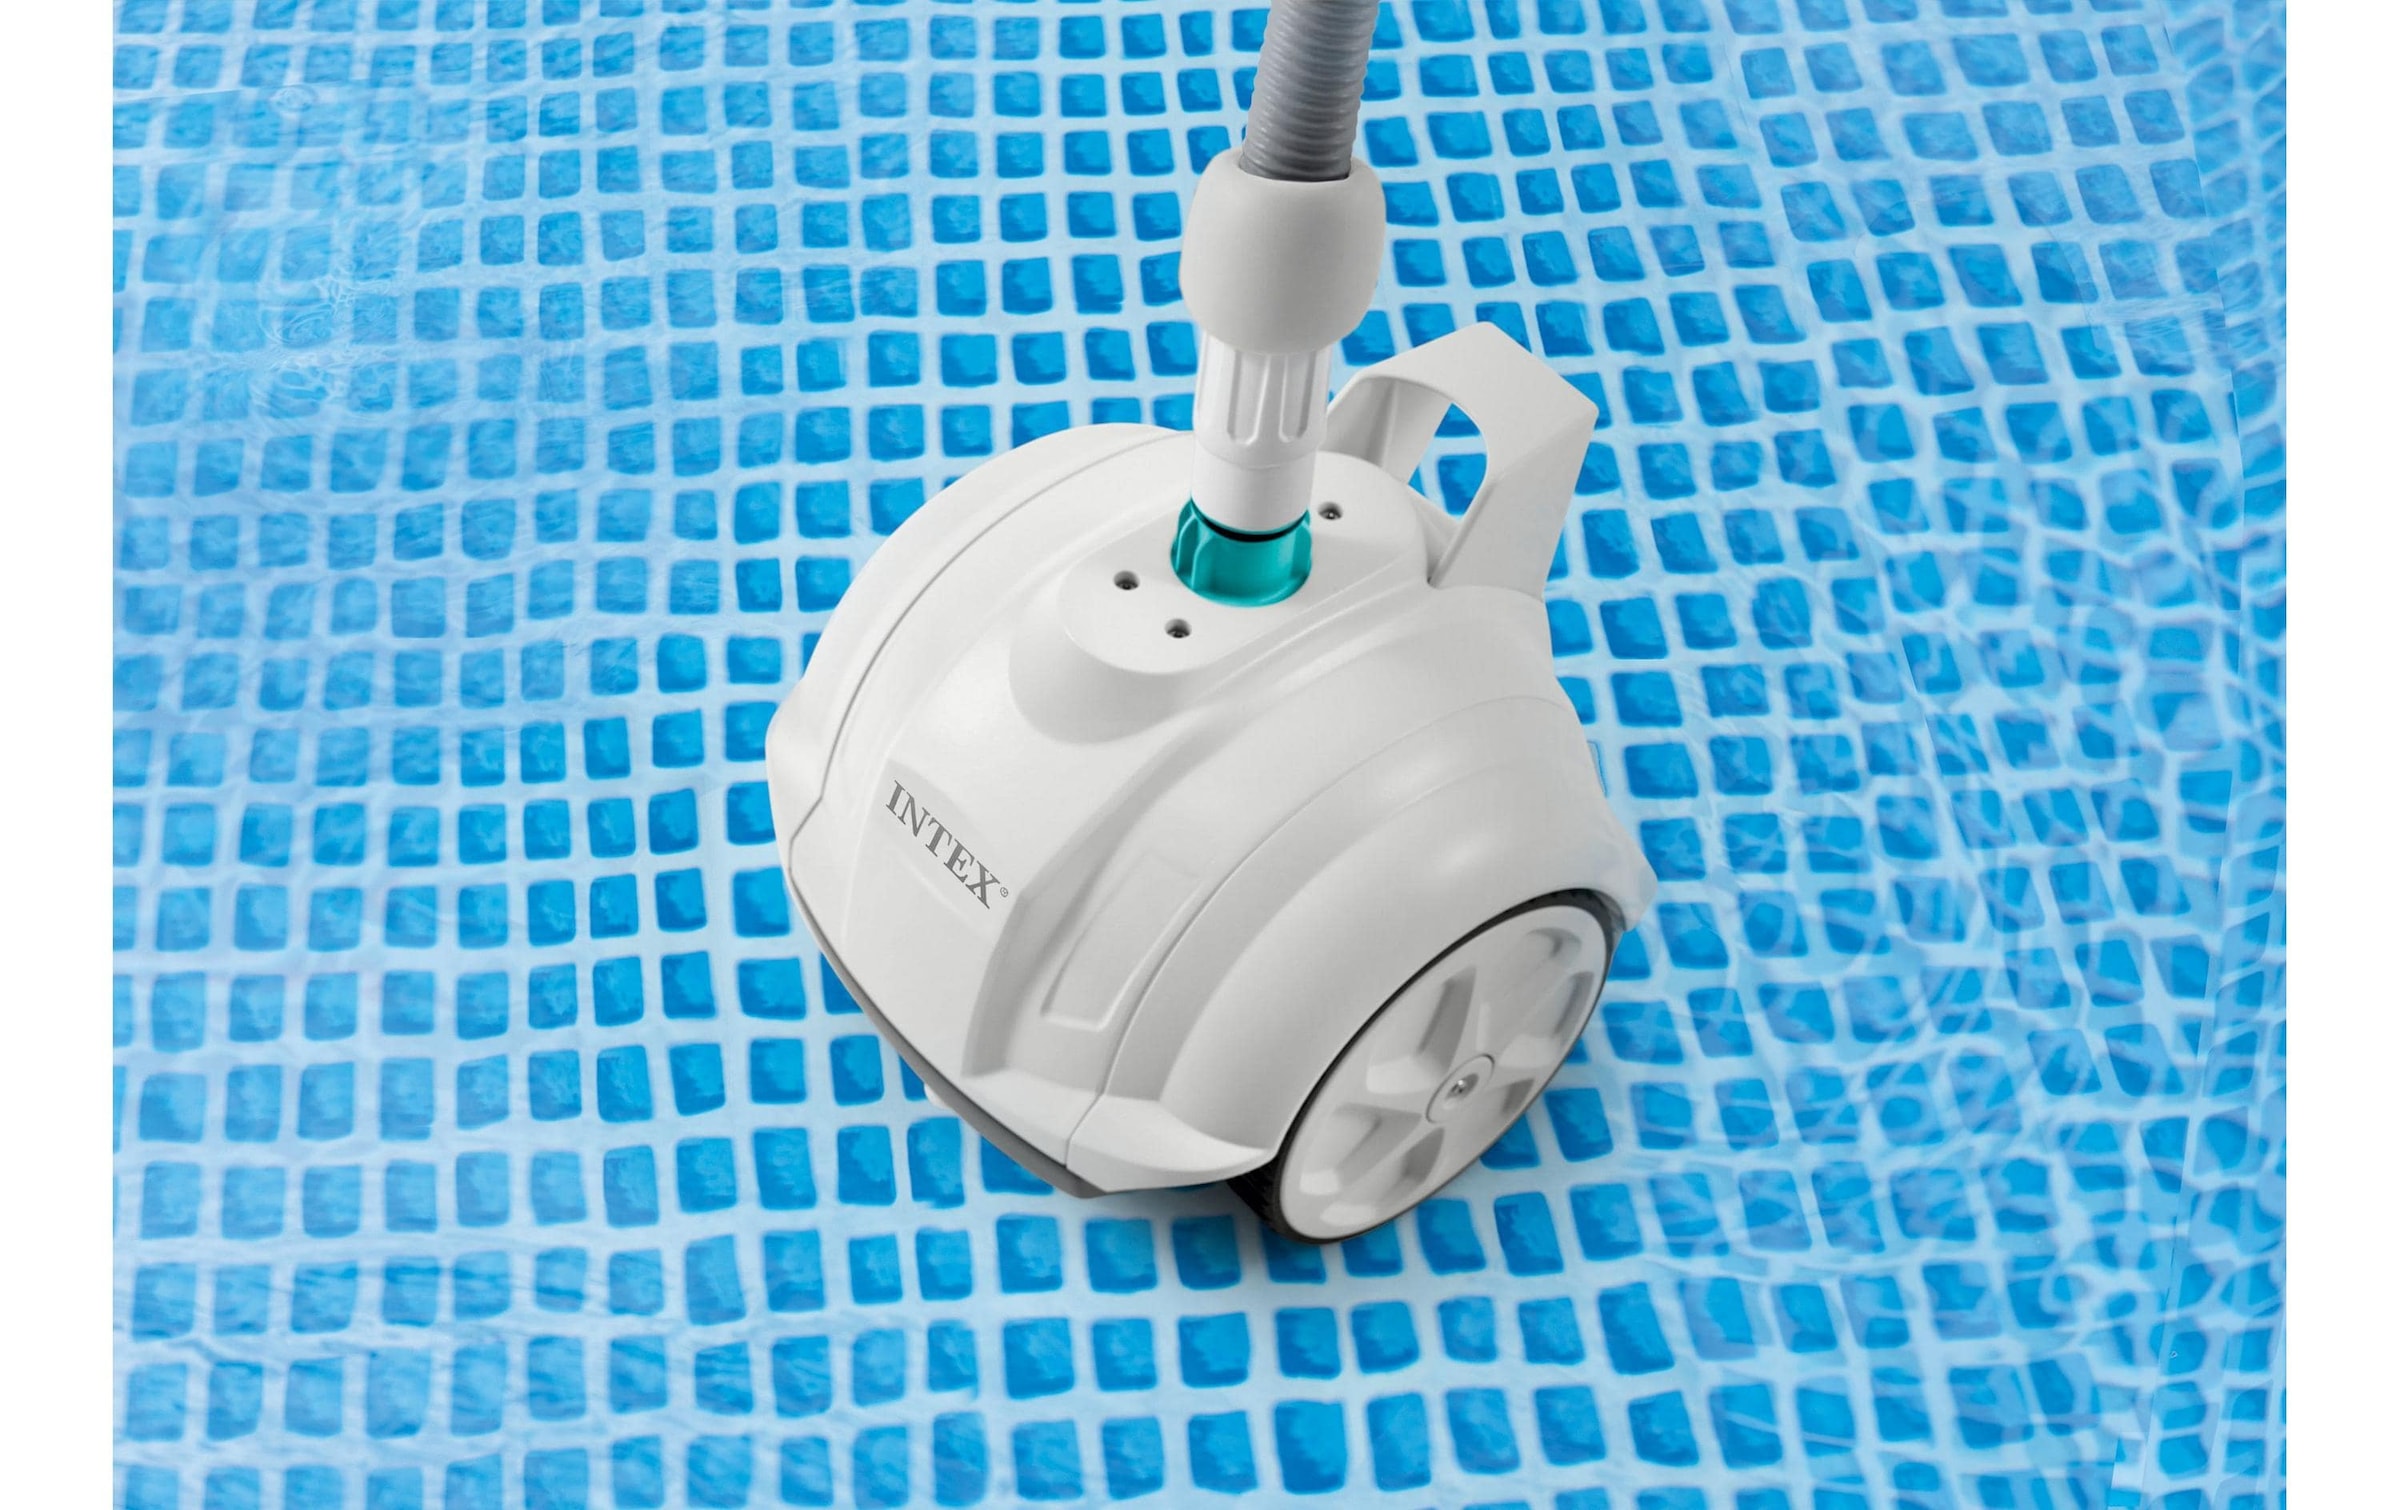 Intex Poolbodensauger »ZX50 Automatic Pool Cleaner«